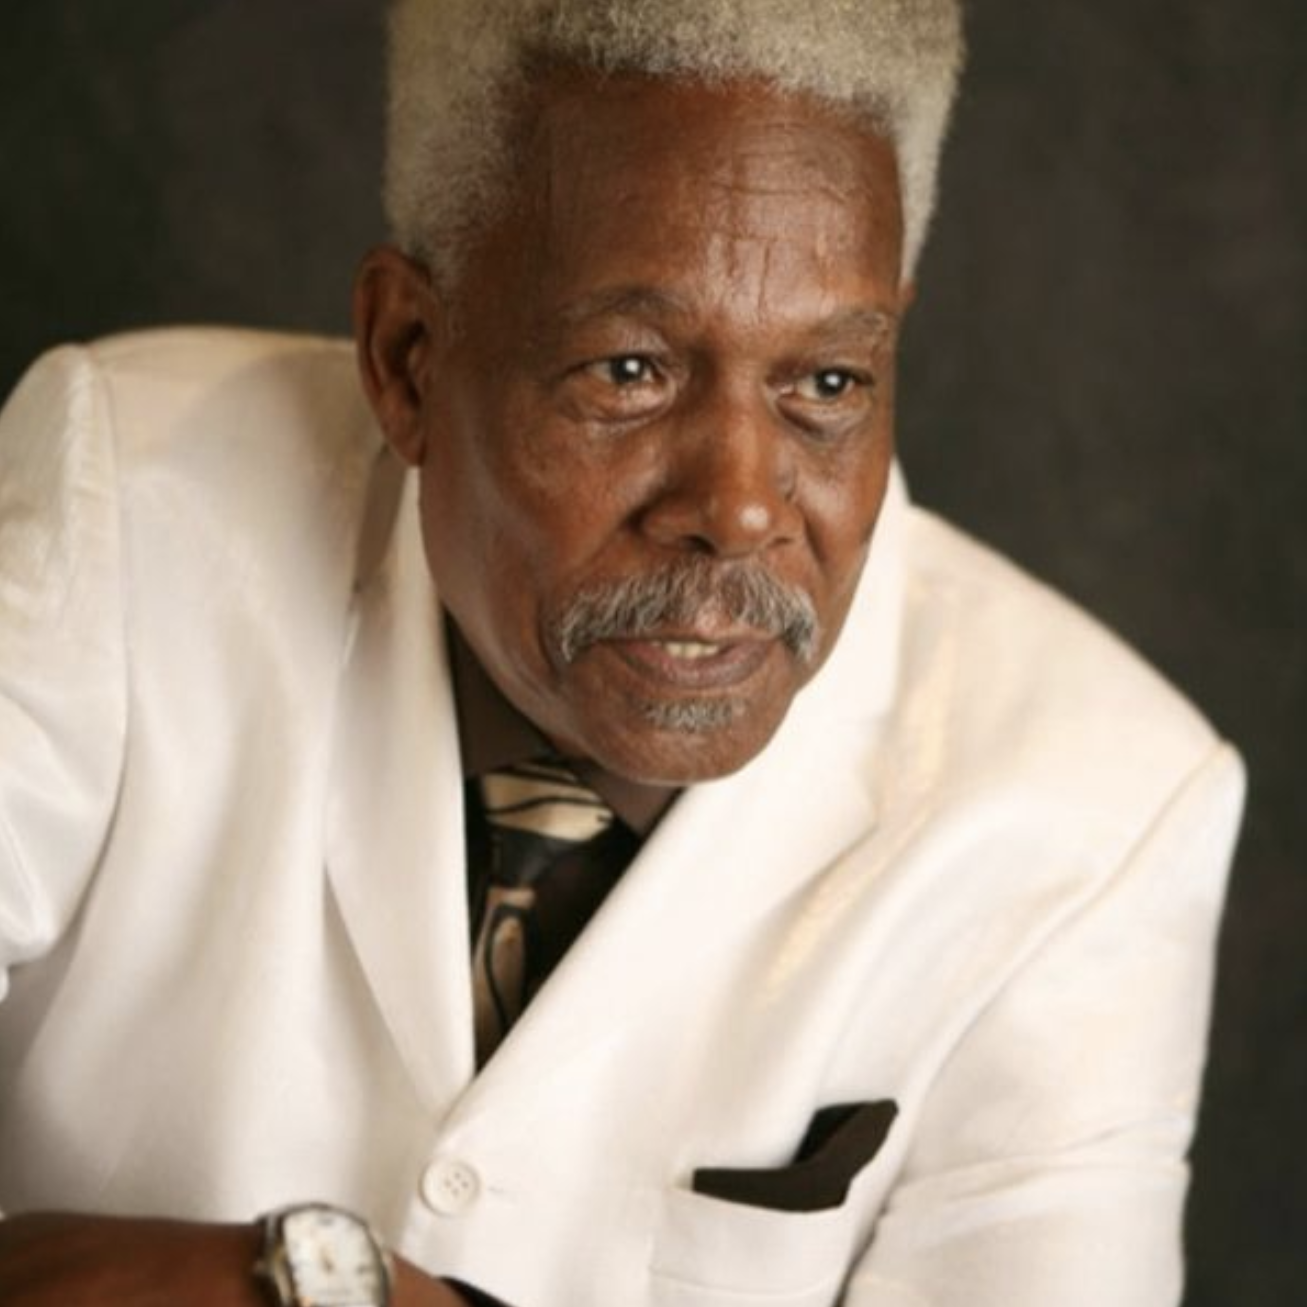 Eddie Floyd’s Hall of Fame Career & New Autobiography on ‘Songcraft’